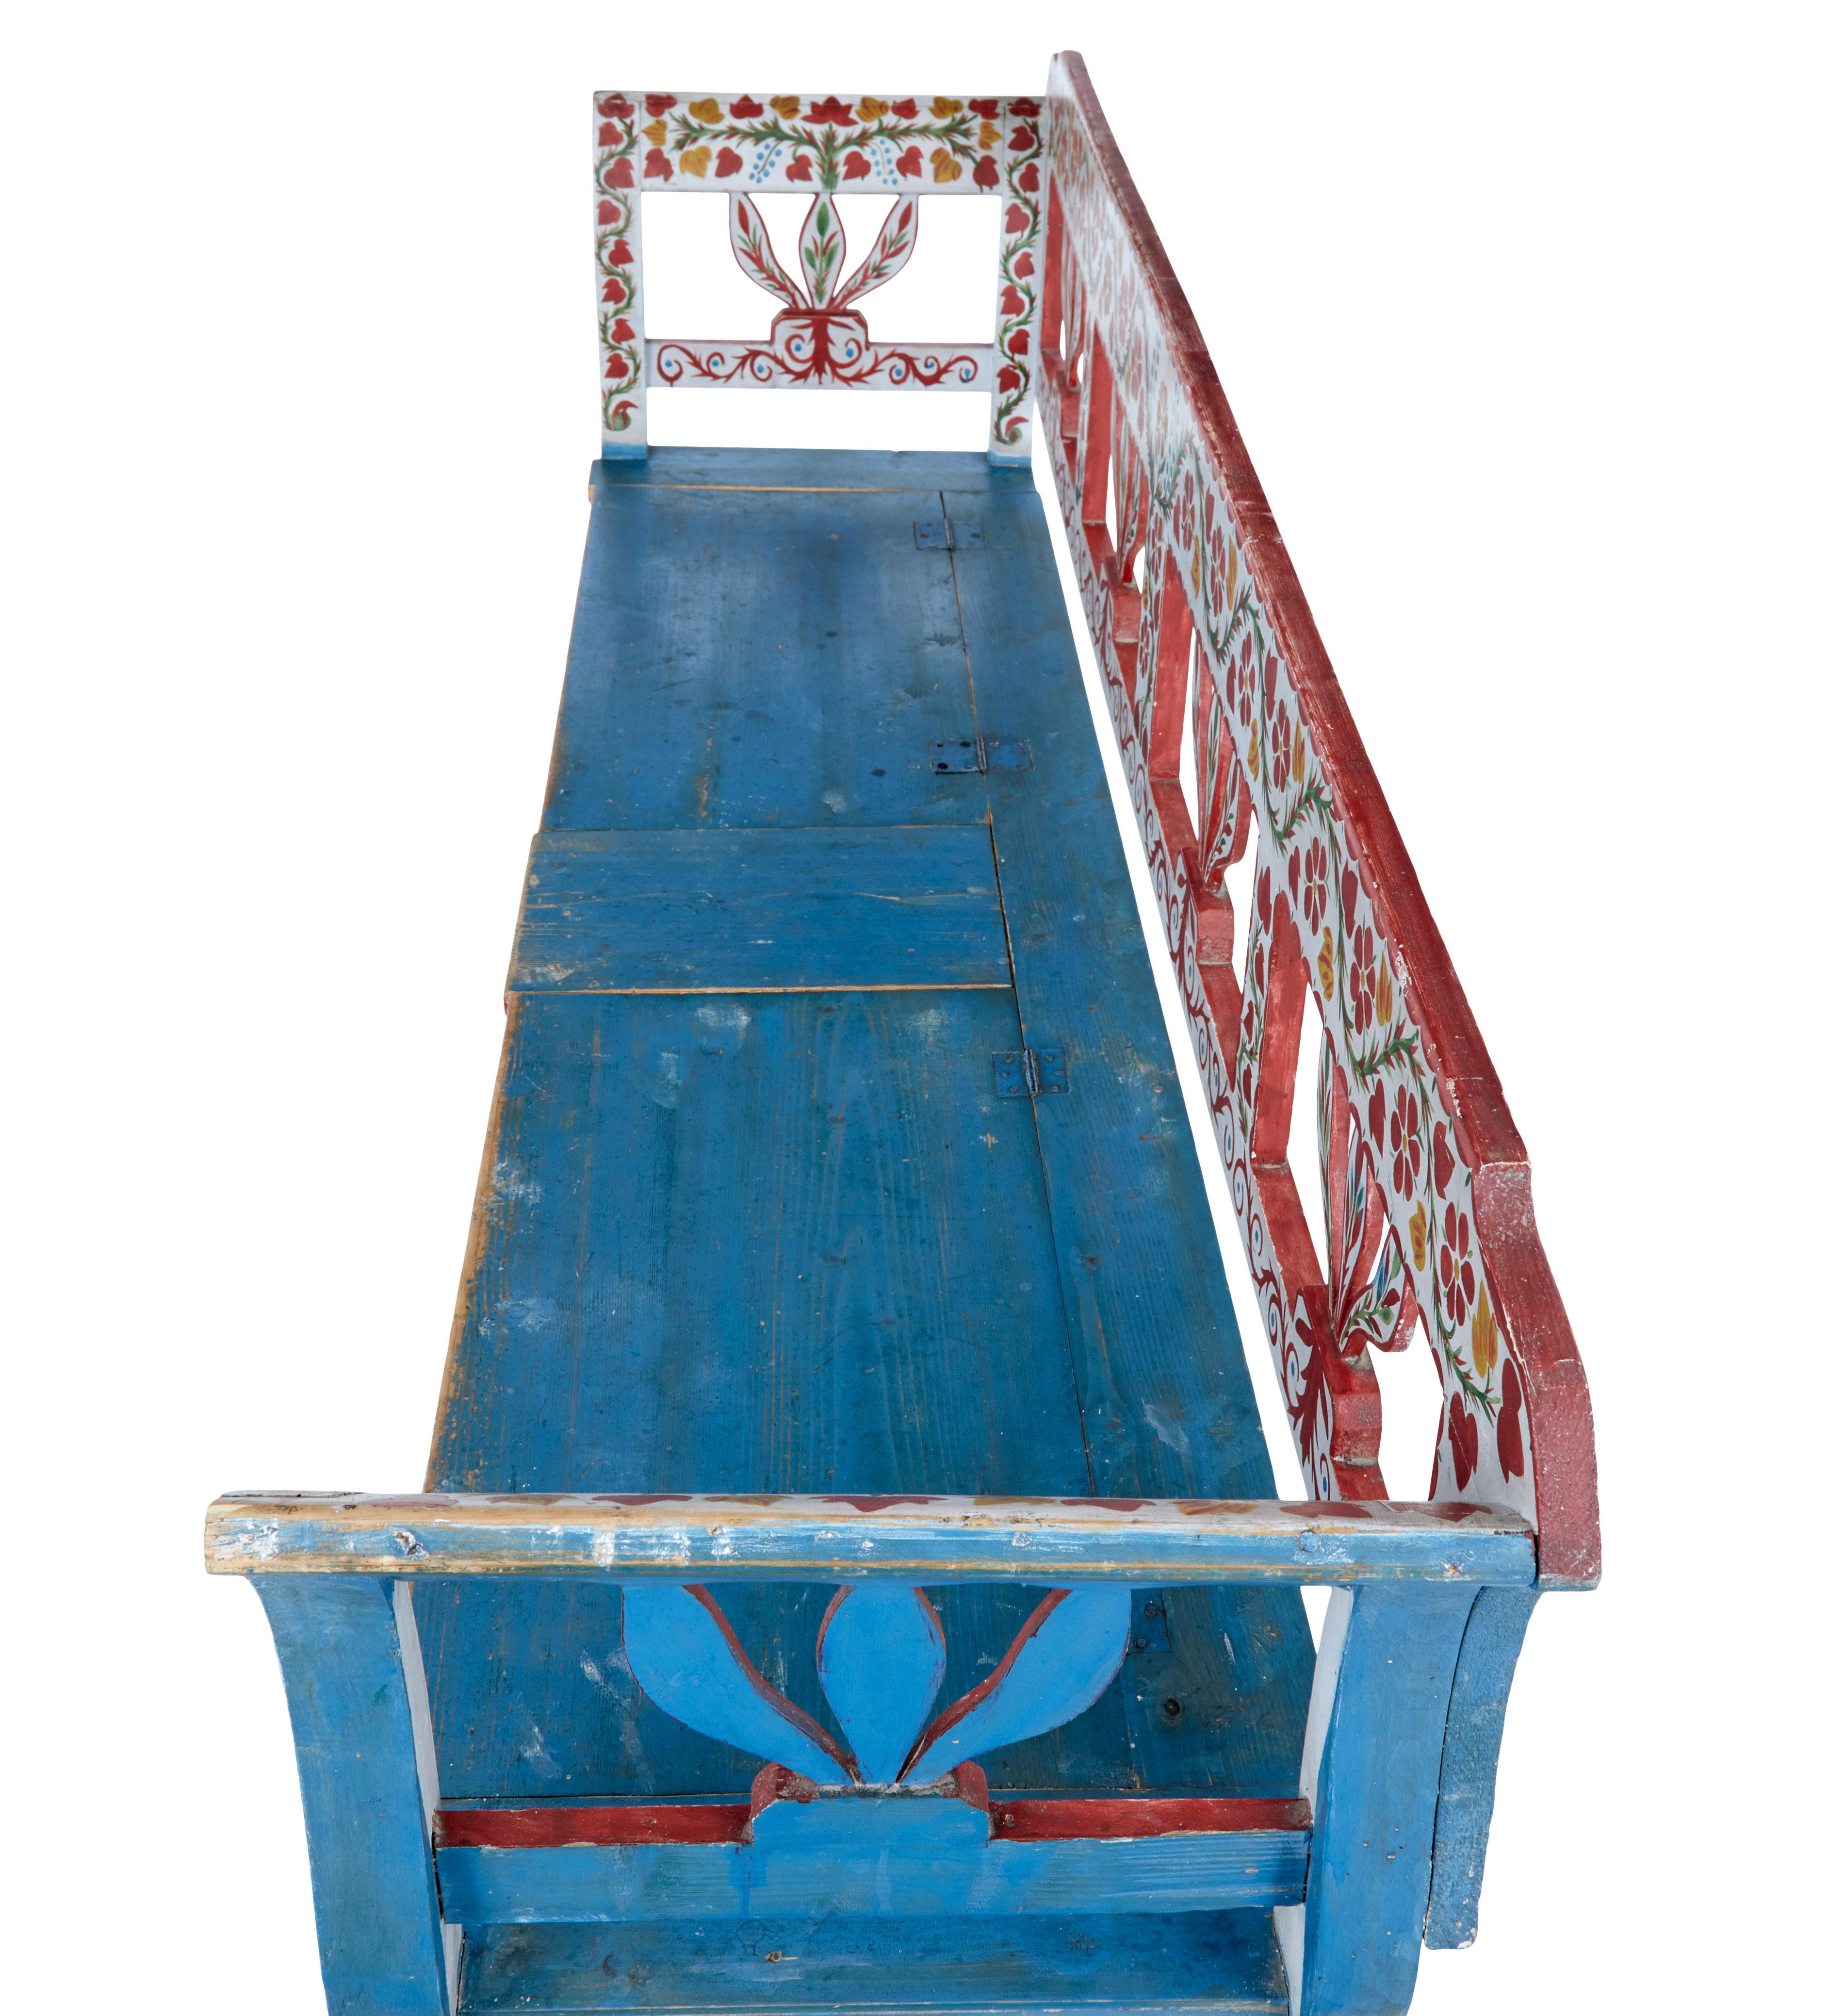 Early 20th century hand painted folk art pine bench circa 1900.

Fine quality Hungarian traditional hand painted bench.  White,red and green floral design to the front and back rest, completed with a contrasting blue to the sides and